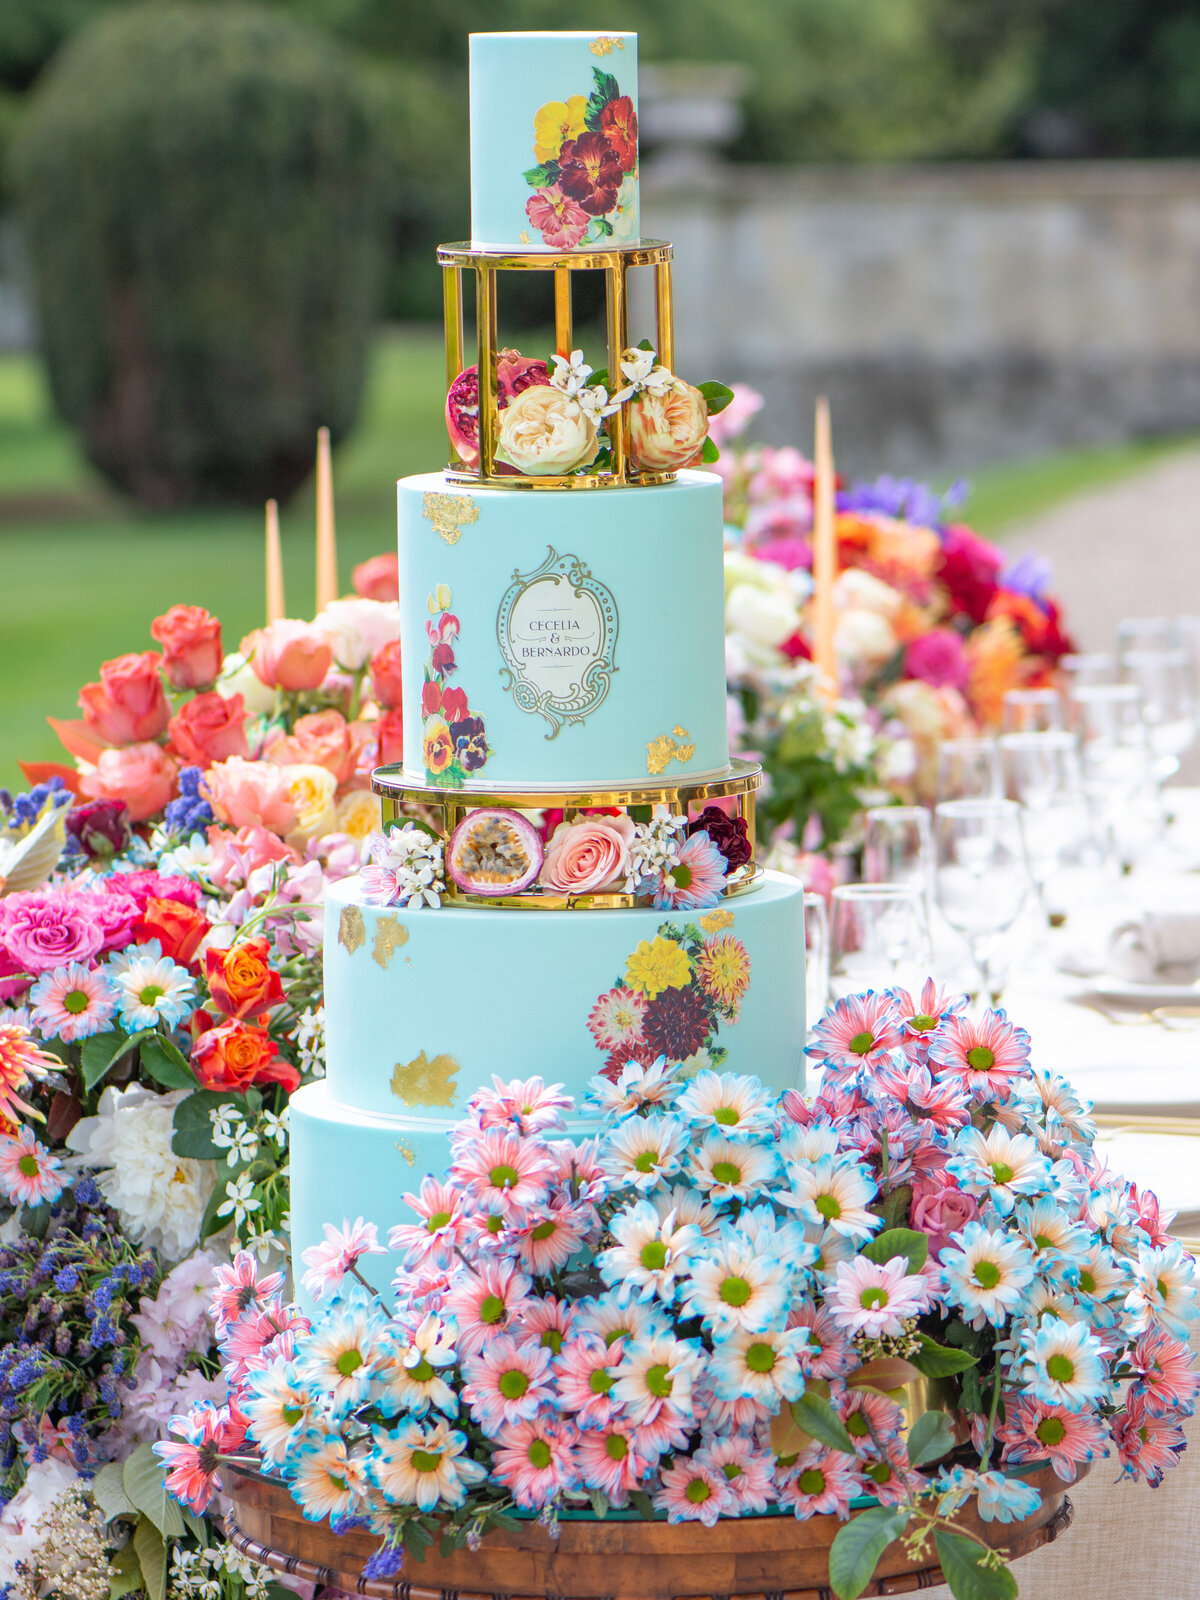 Baby blue wedding cake with bold florals at outdoor wedding at Prestwold Hall